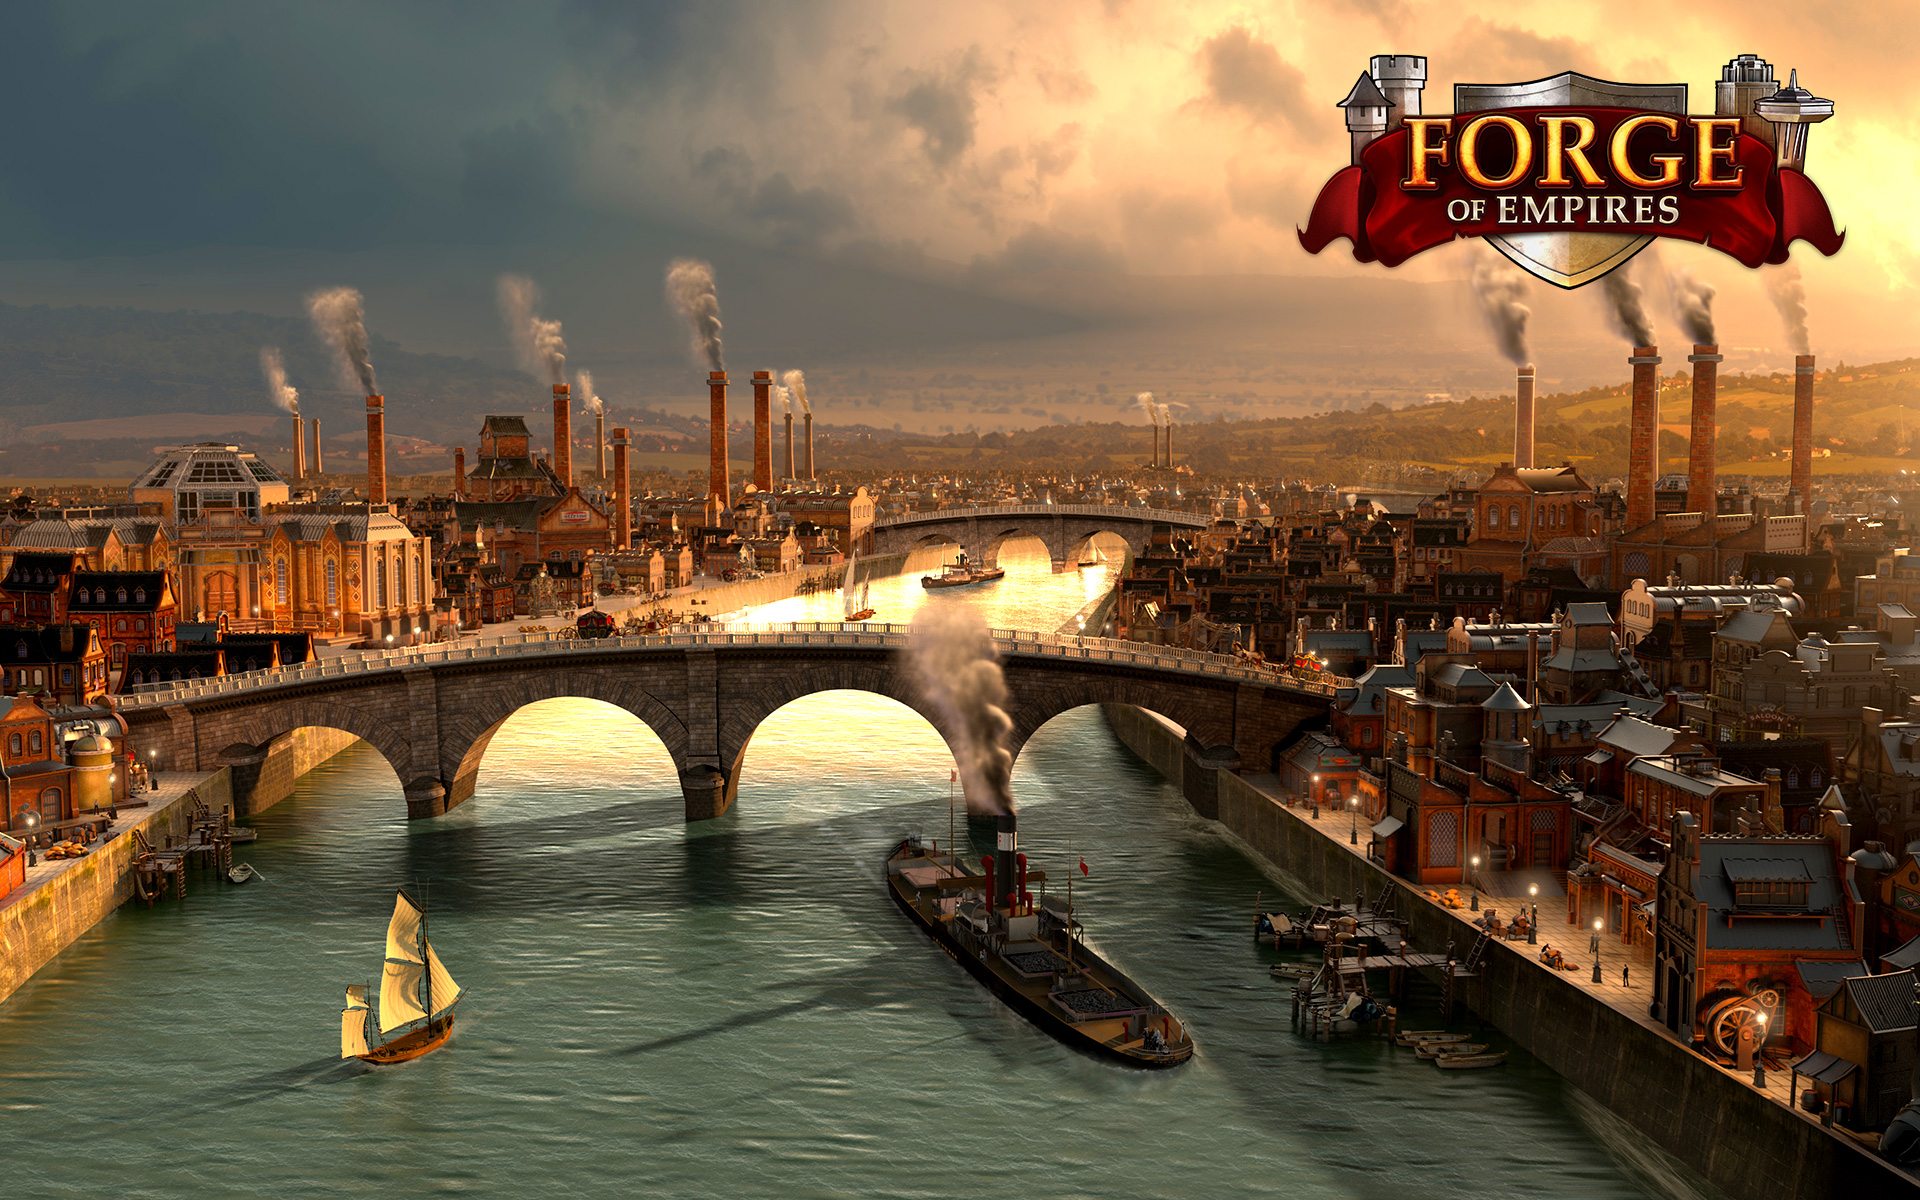 Ship Water Bridge Forge Of Empires River Video Games Cityscape City Building Clouds Factories Chimne 1920x1200